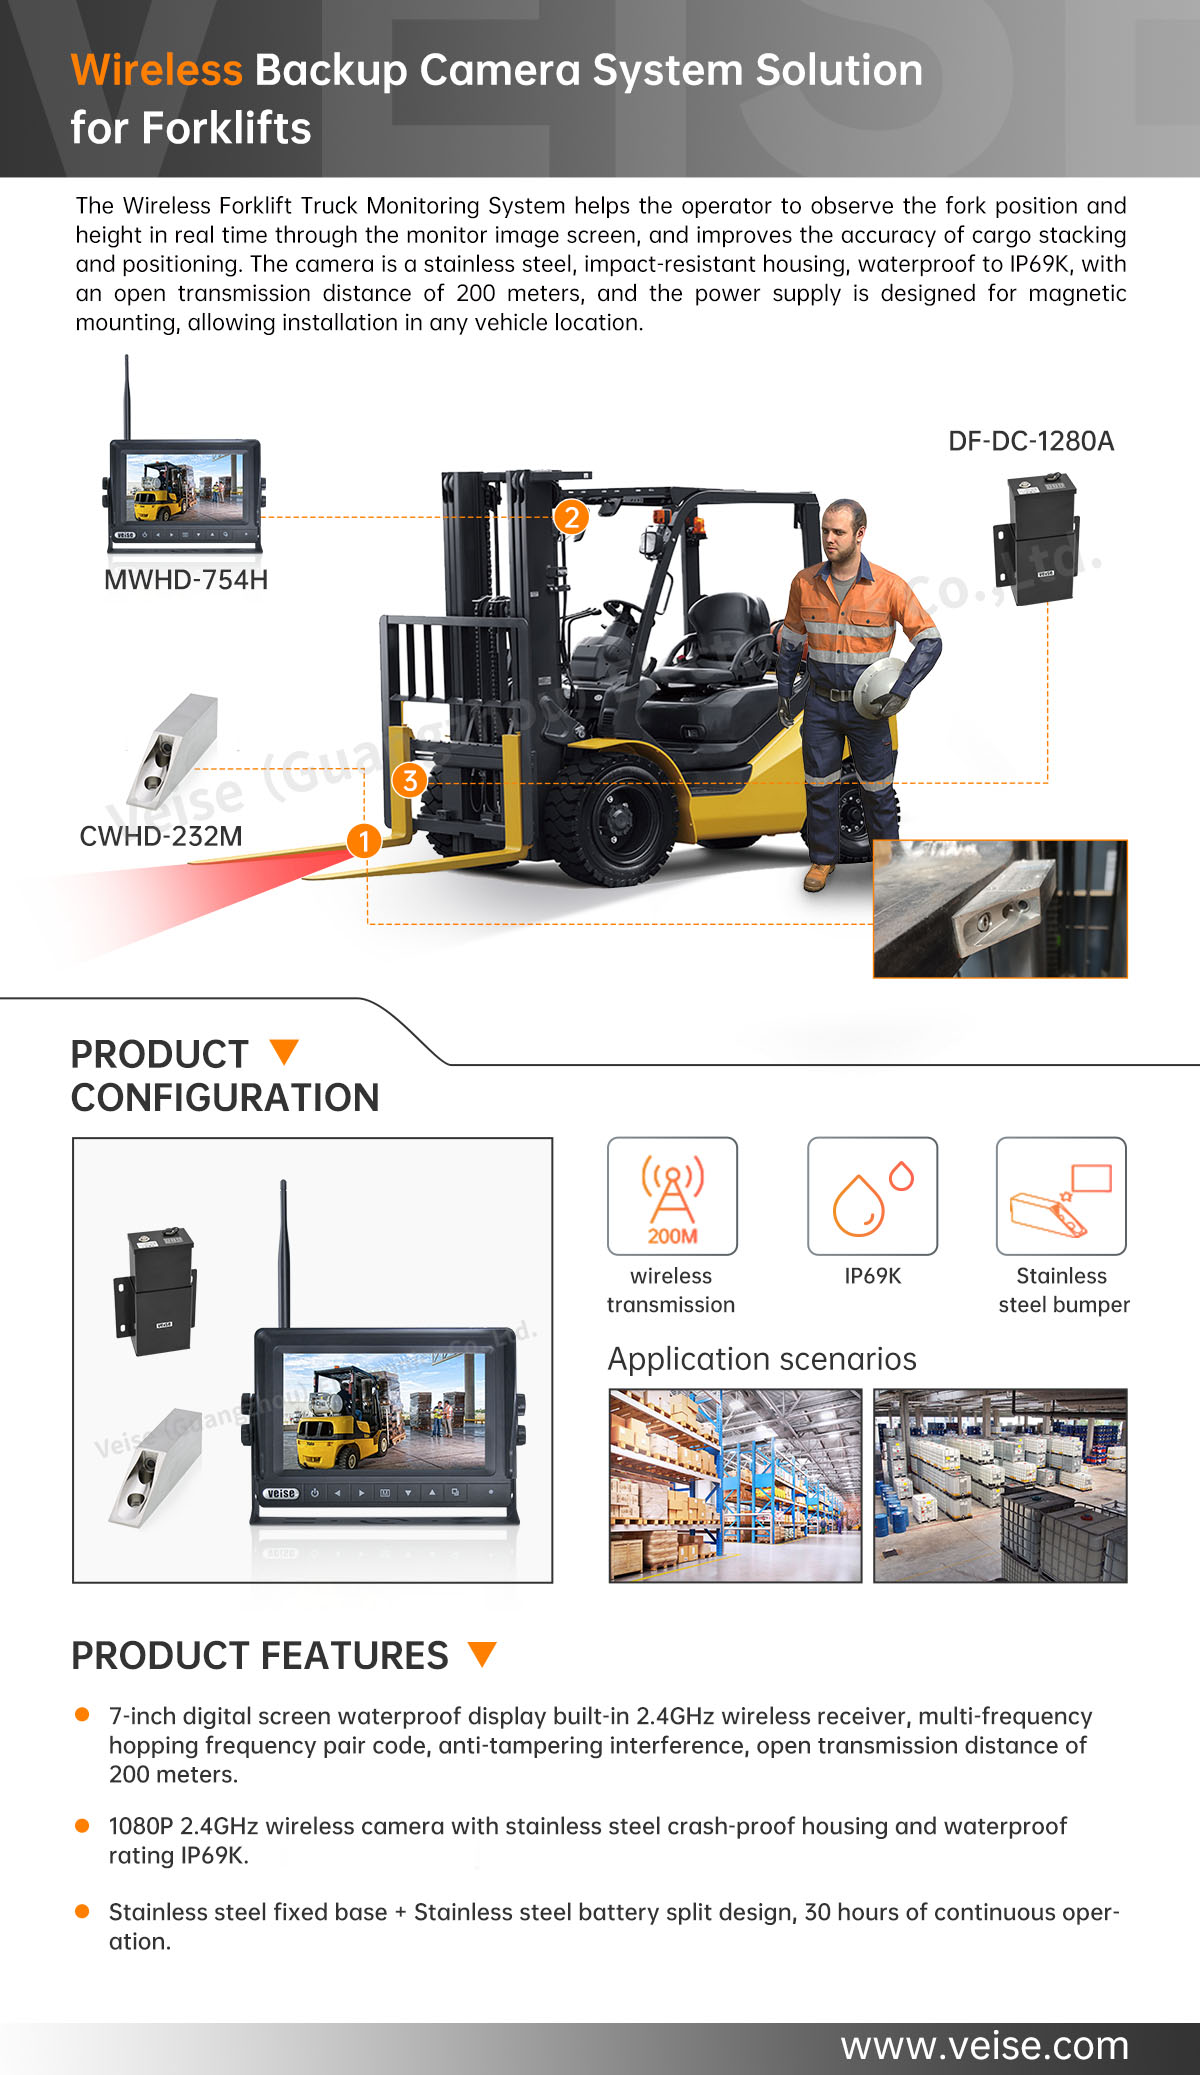 Wireless Backup Camera System Solution for Forklifts